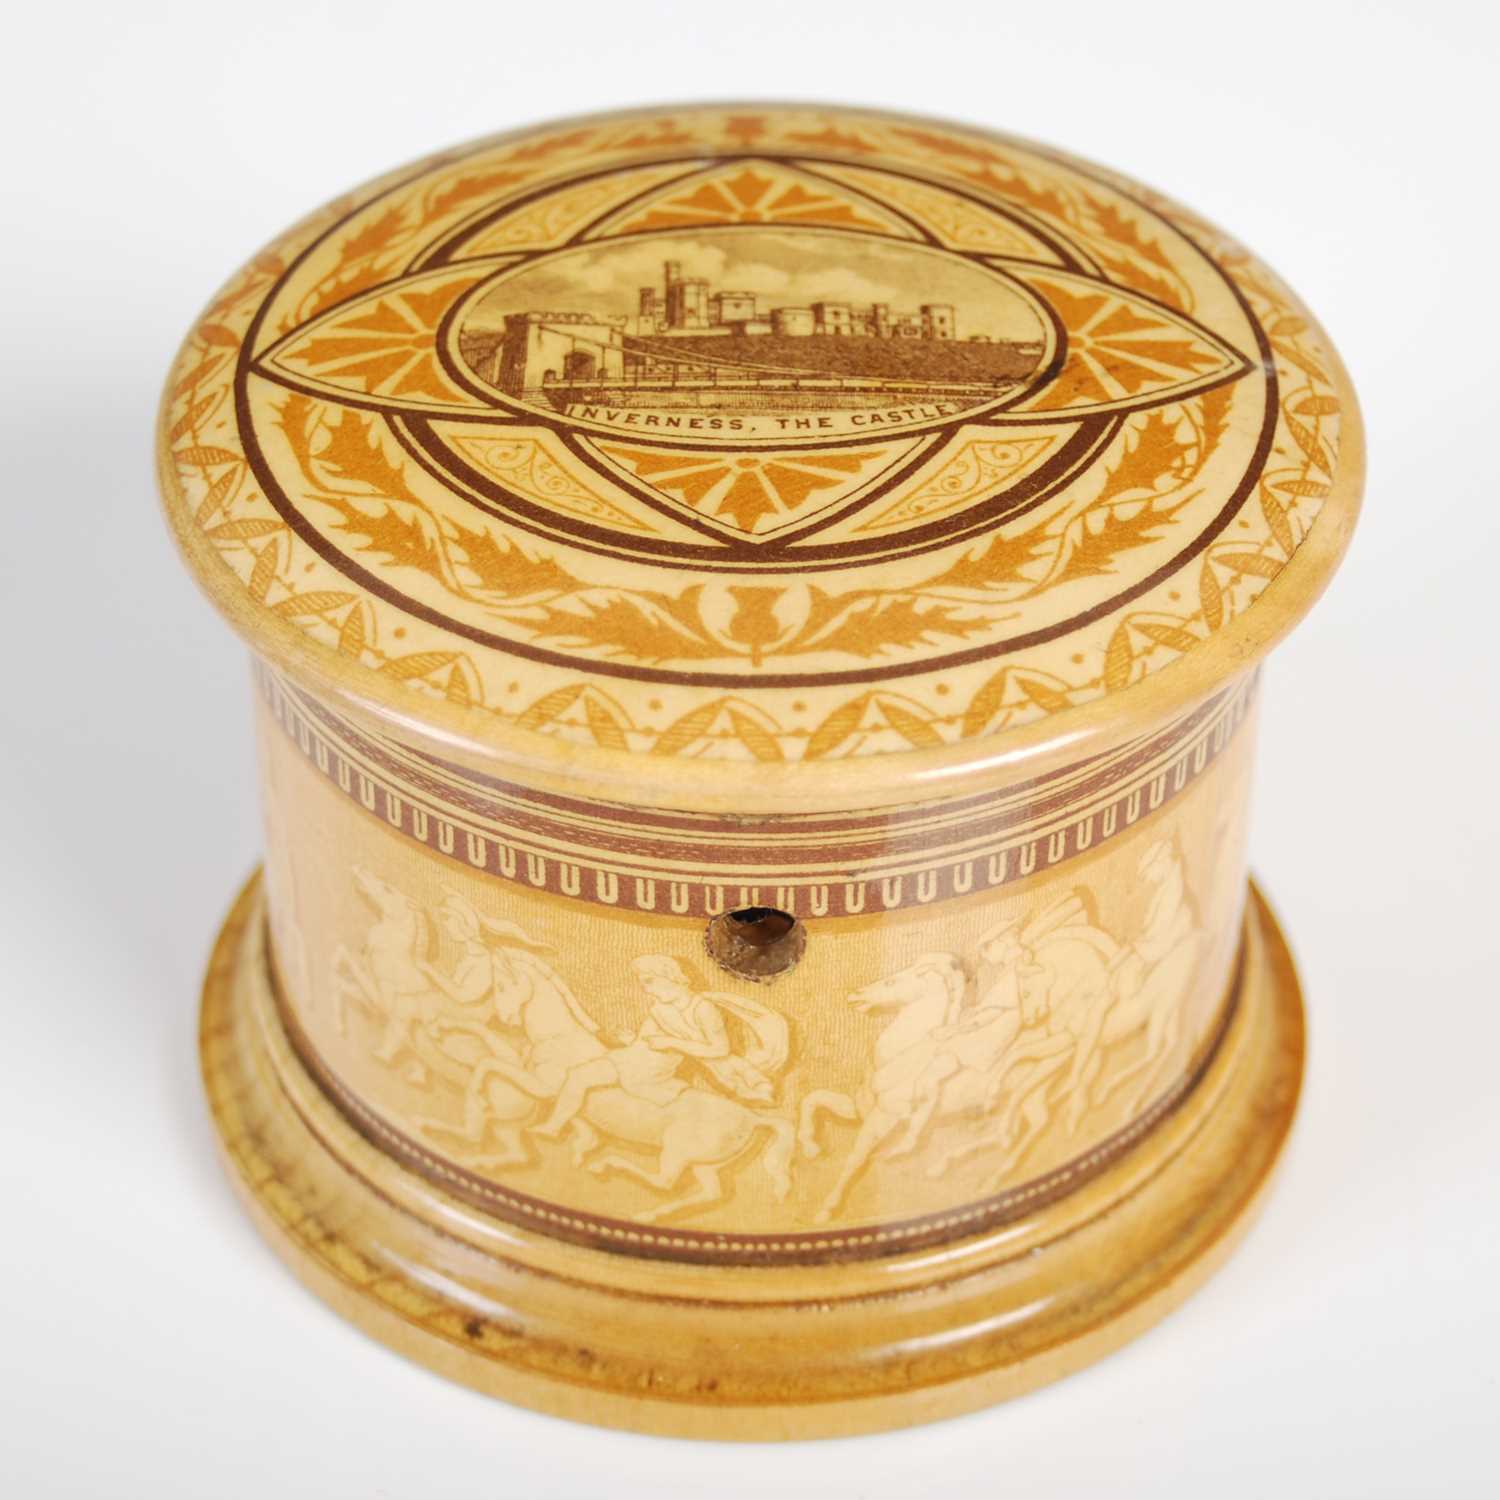 A Mauchline ware circular string box, the detachable cover depicting Inverness Castle within borders